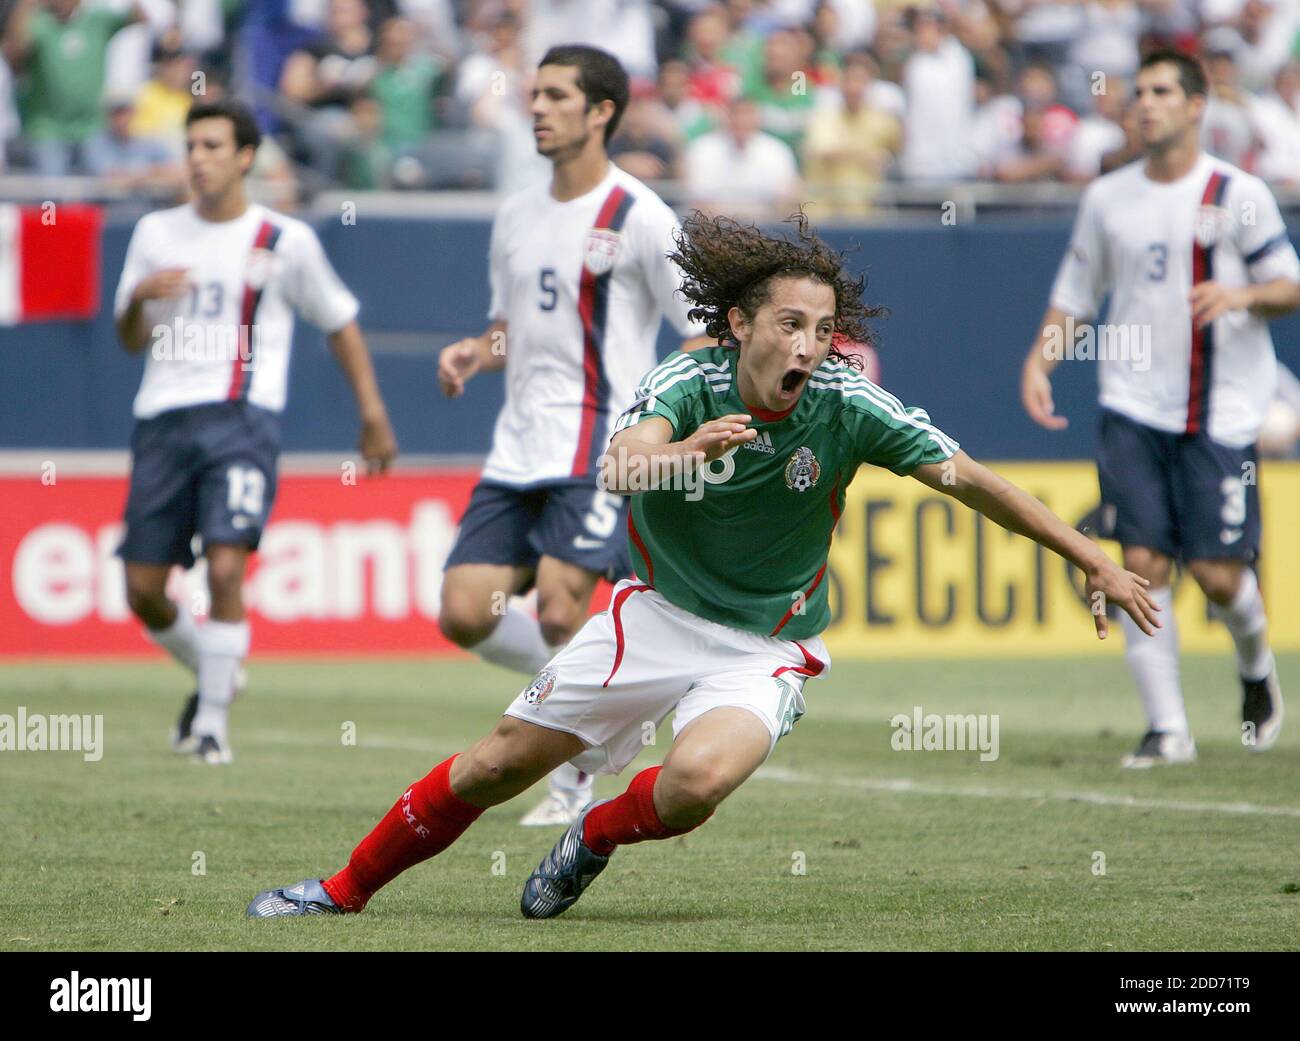 NO FILM, NO VIDEO, NO TV, NO DOCUMENTARY - Mexico's Jose Andres Guardado scores a goal against the United States in the first half of the CONCACAF Gold Cup final. The United States defeated Mexico, 2-1, at Soldier Field in Chicago, IL, USA on June 24, 2007. Photo by Jose M. Osorio/Chicago Tribune/MCT/Cameleon/ABACAPRESS.COM Stock Photo